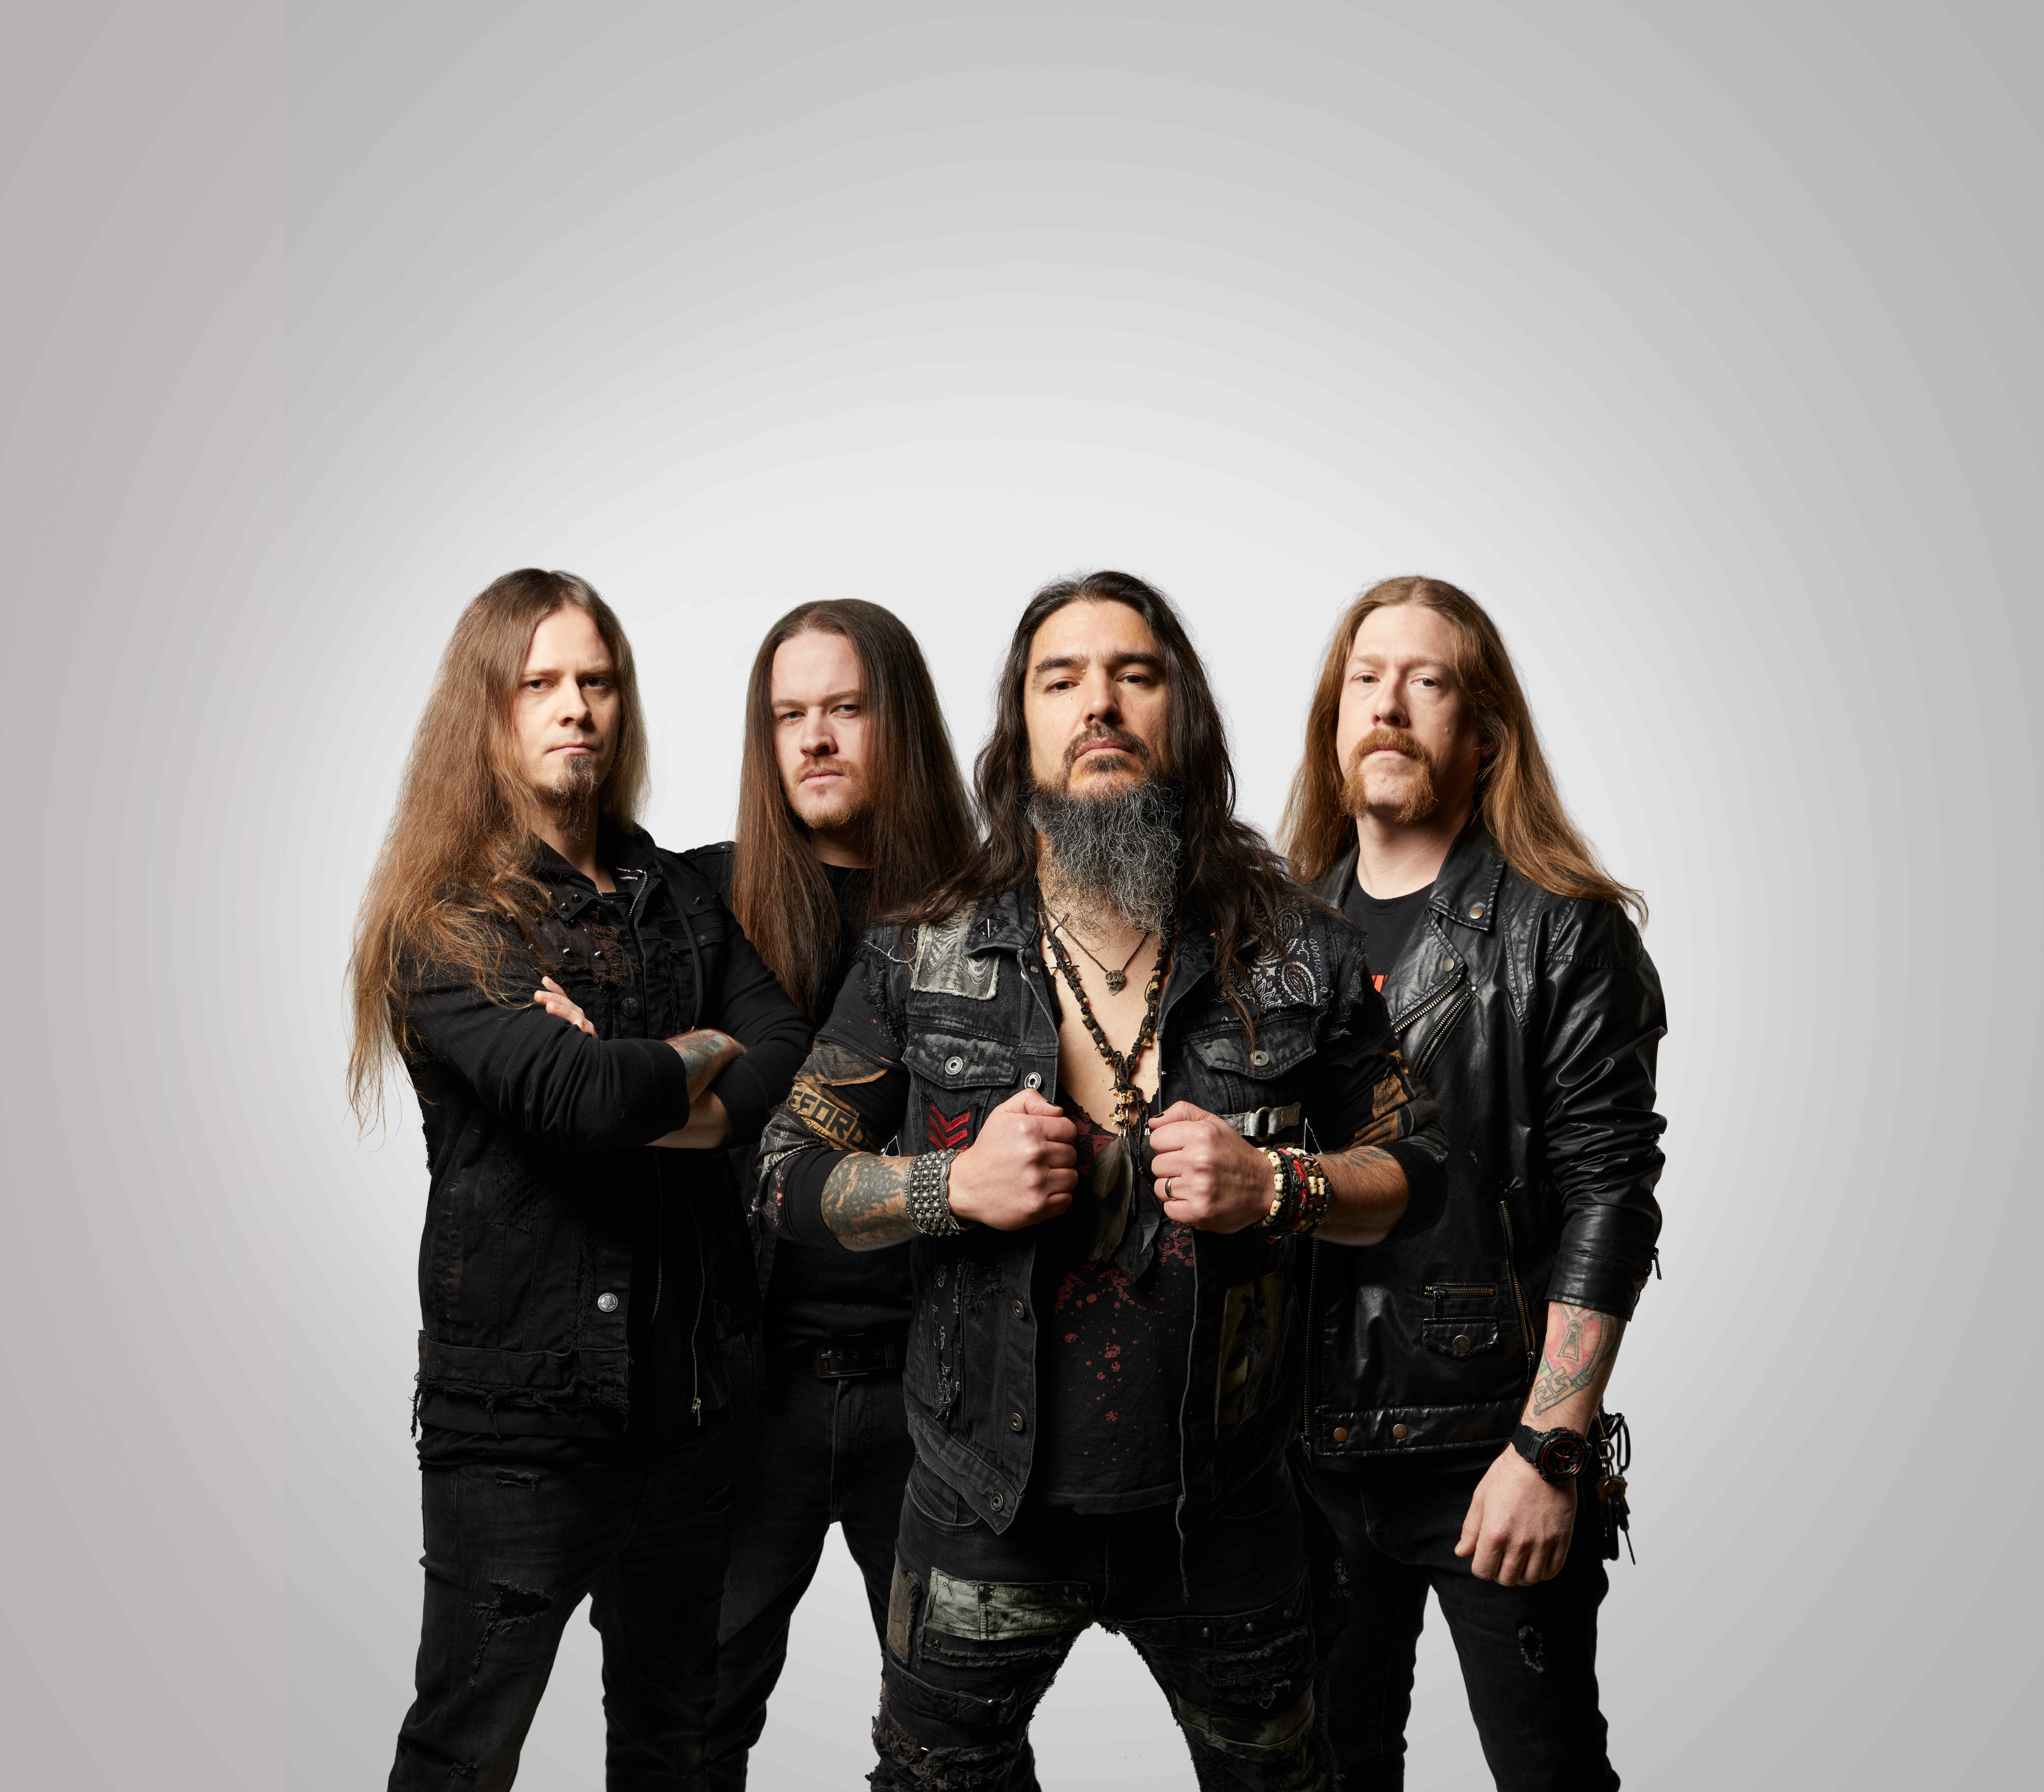 MACHINE HEAD - ANNOUNCE SLAUGHTER THE MARTØUR NØRTH AMERICA 2024 WITH DIRECT SUPPORT FEAR FACTORY